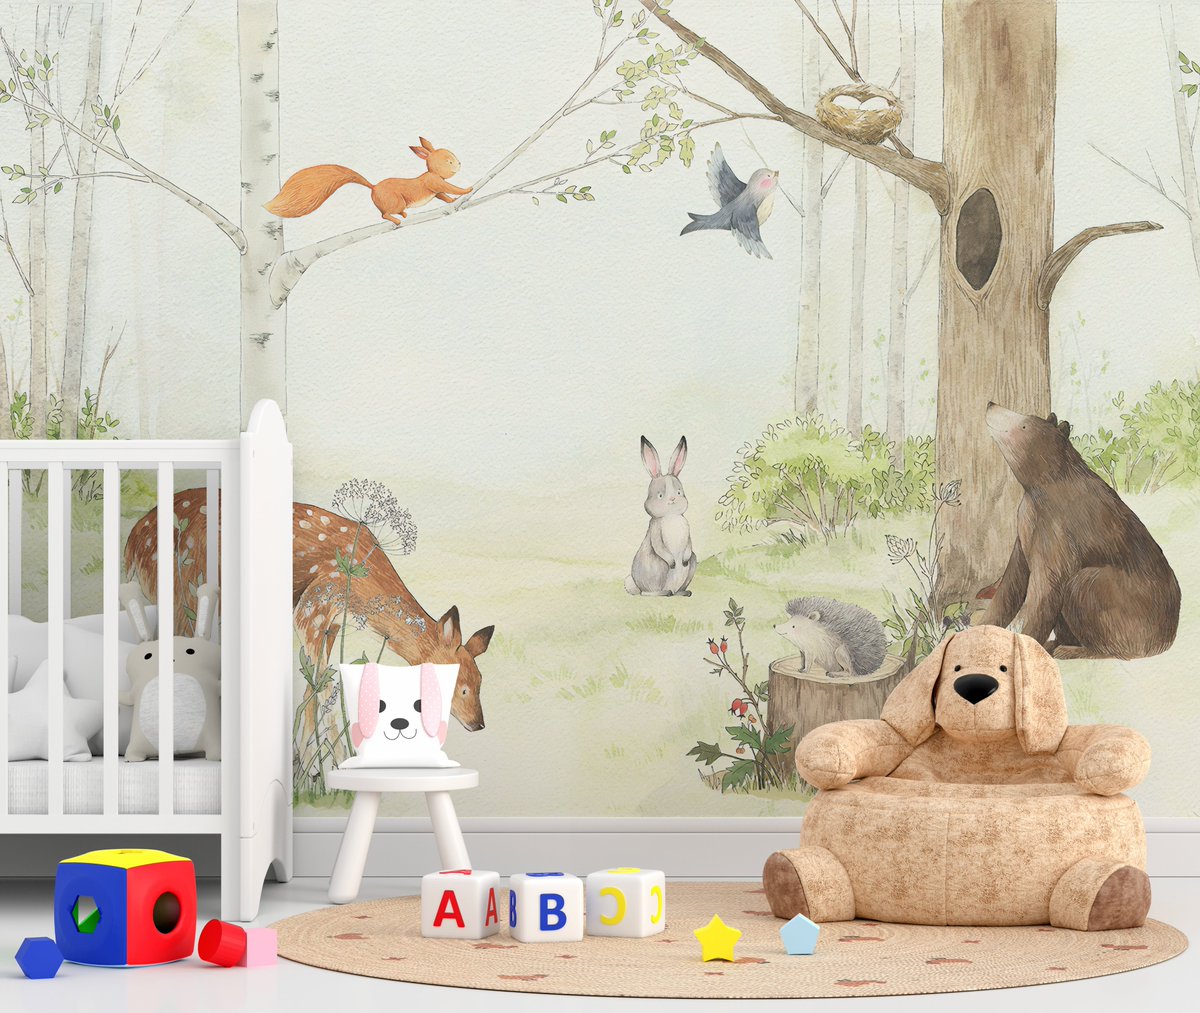 Check out our Forest Friends Self Adhesive Wallpaper Mural! 🌲🦊#ForestFriends #WallpaperMural #RoomMakeover #NatureInspired #HomeDecor #CozyHome #DIYDecor #KidsRoomIdeas #SelfAdhesiveWallpaper #DecorIdeas #walldecor #interiordesign #wallpaperforwalls  

bit.ly/443kLAr